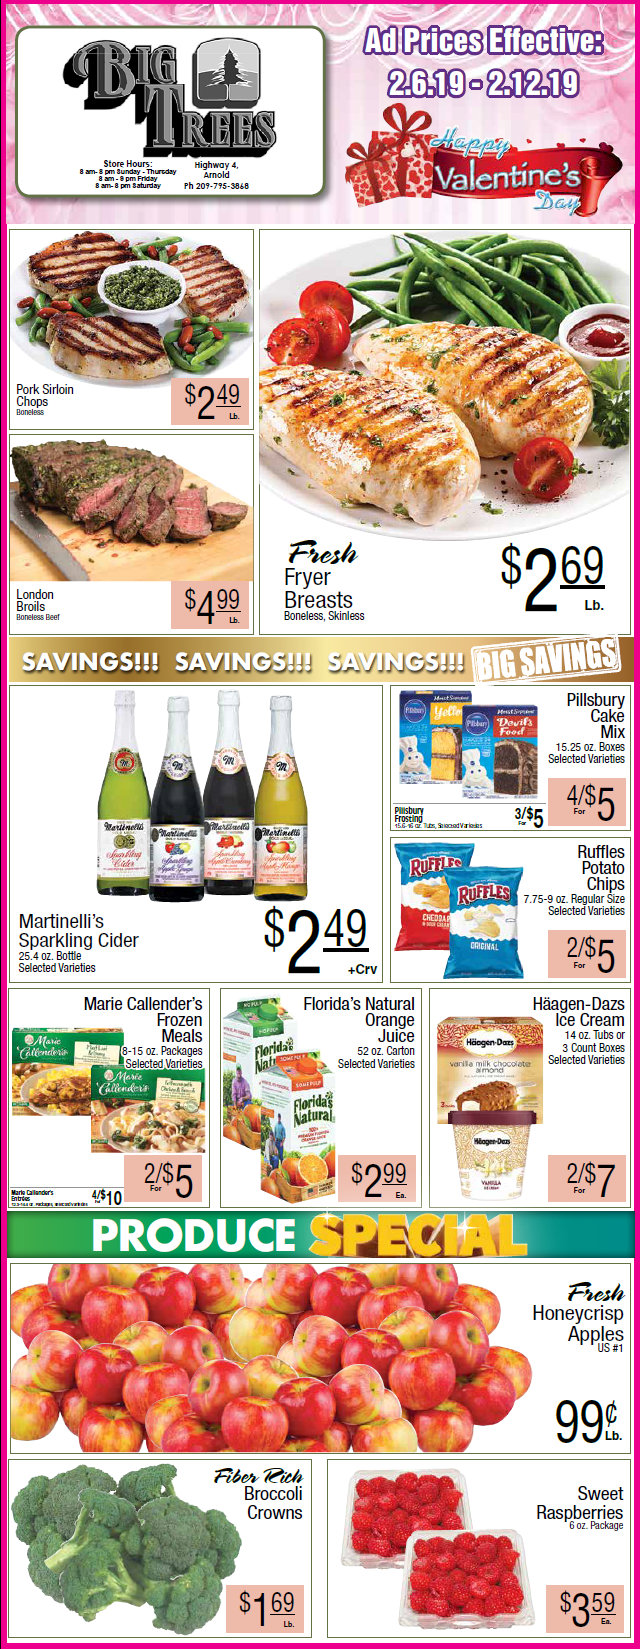 Big Trees Market Weekly Ad & Grocery Specials Through February 12th